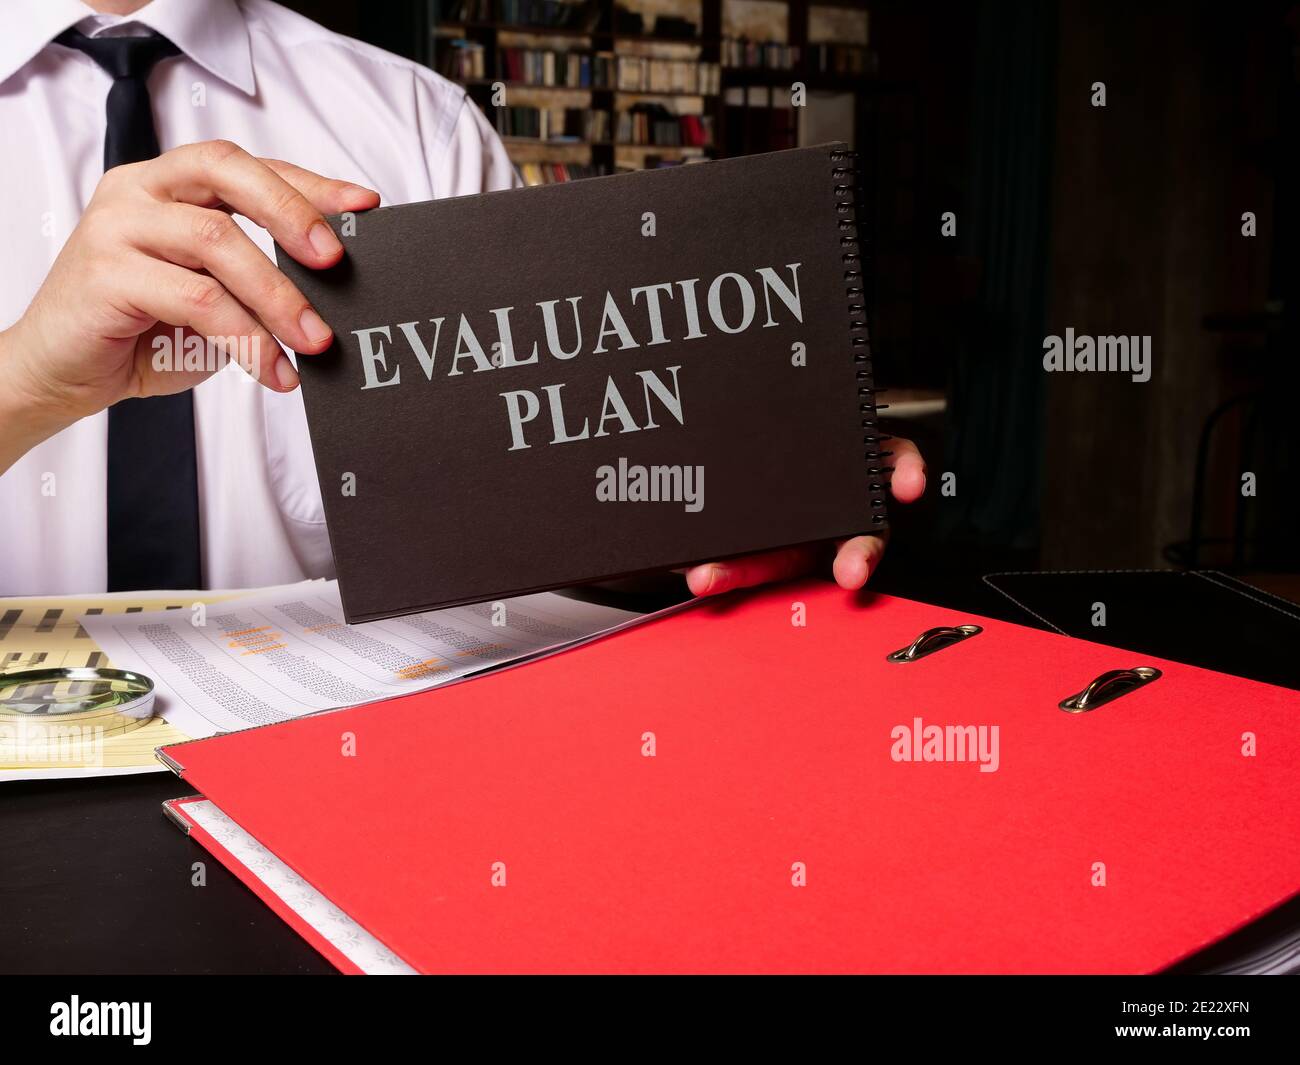 Evaluation plan is in the hands of the clerk who sits at the table. Stock Photo